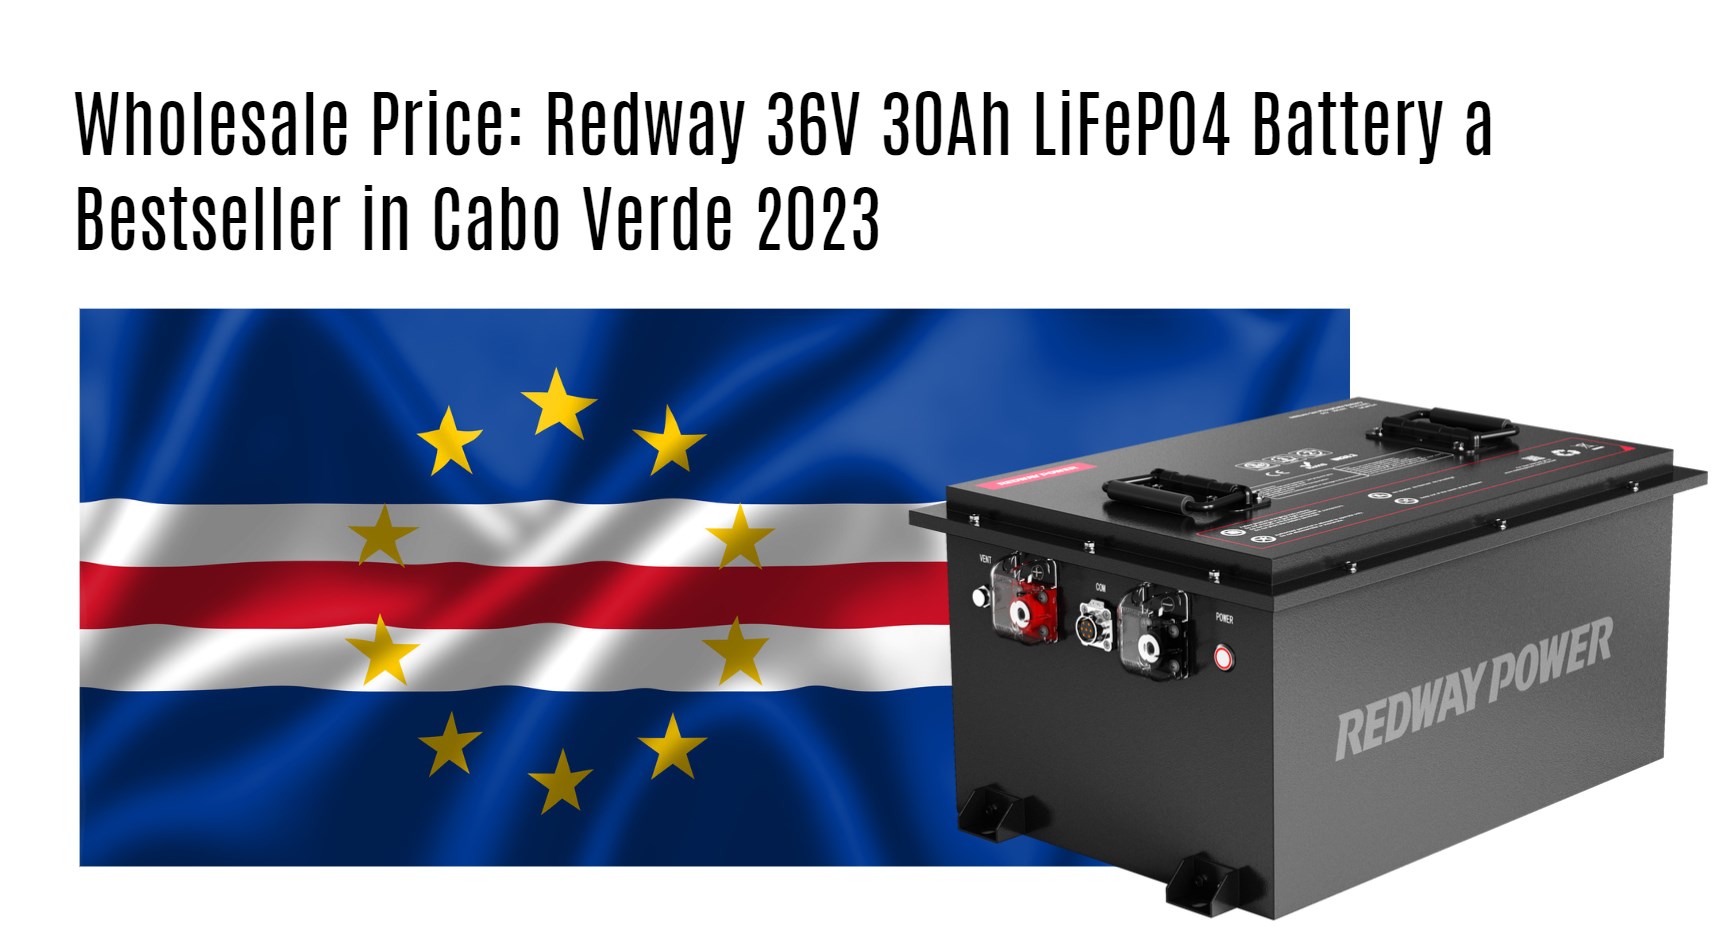 Wholesale Price: Redway 36V 30Ah LiFePO4 Battery a Bestseller in Cabo Verde 2023